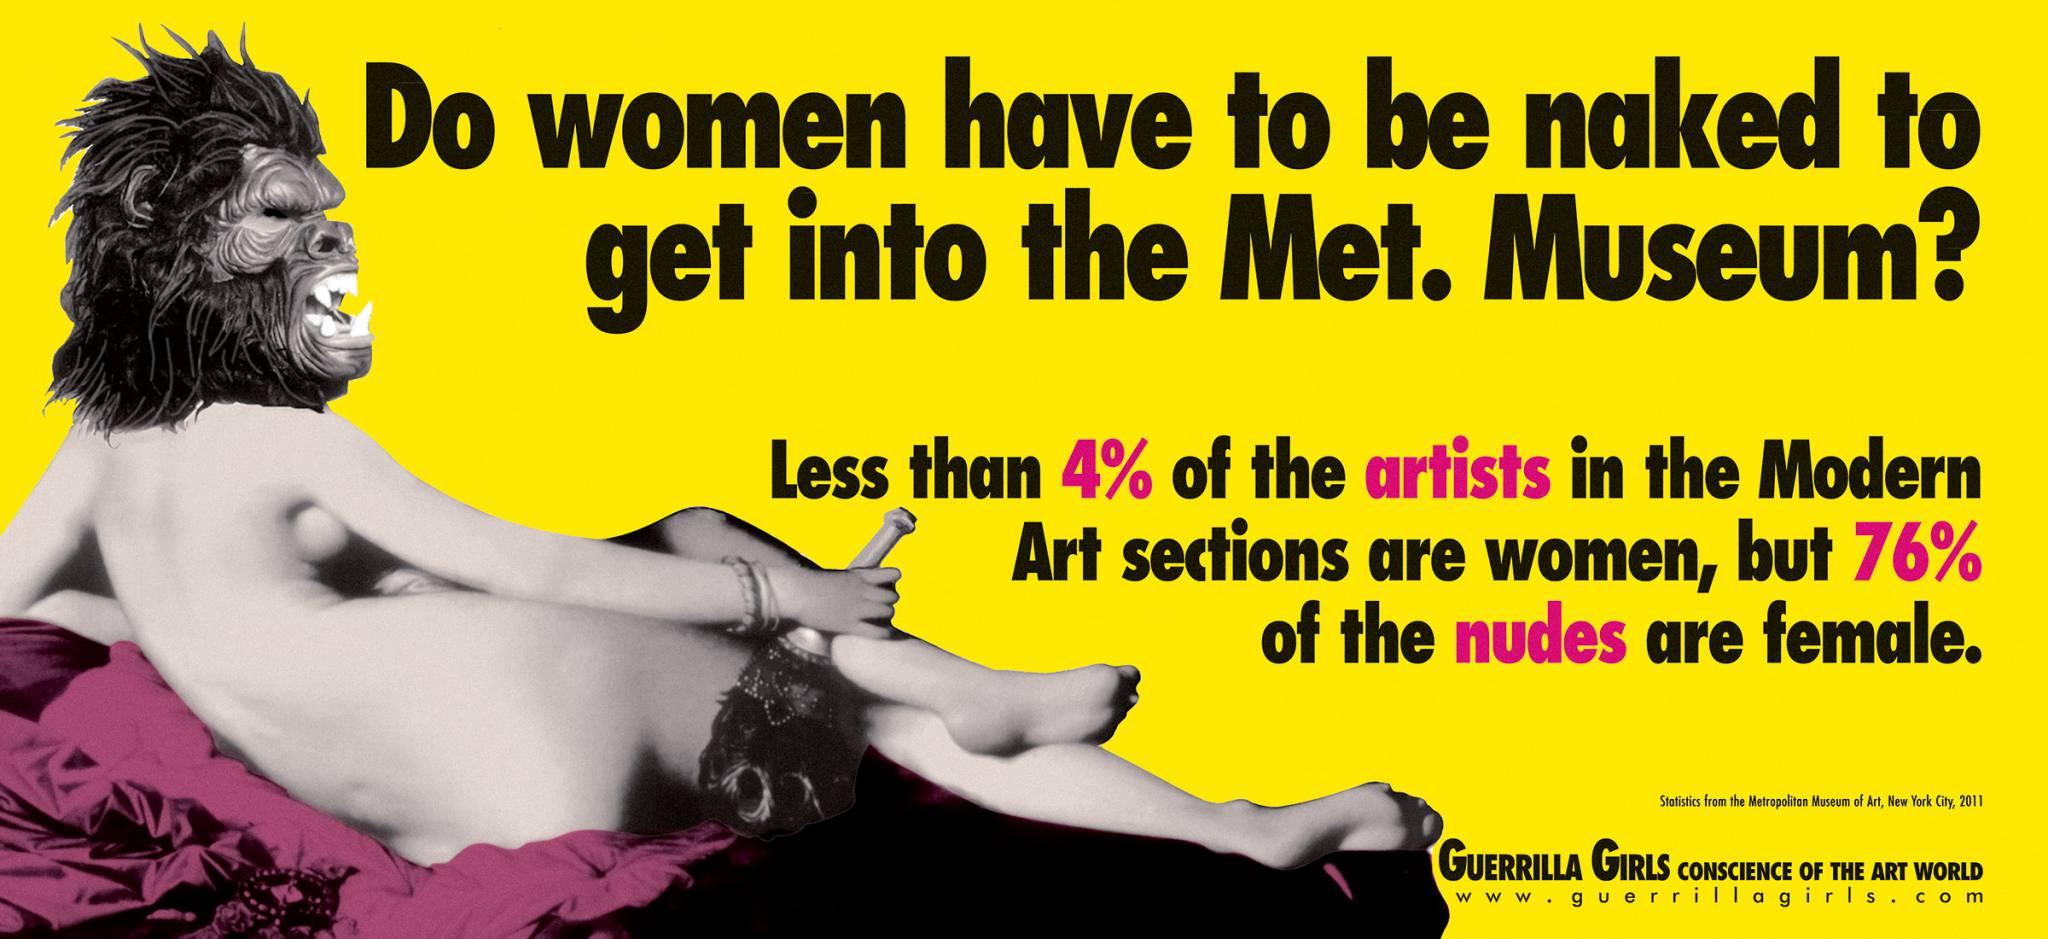  Plakat kolektywu Guerrilla Girls „Do women have to be naked to get into the Met. Museum?” (1989). (Fot. materiały prasowe)